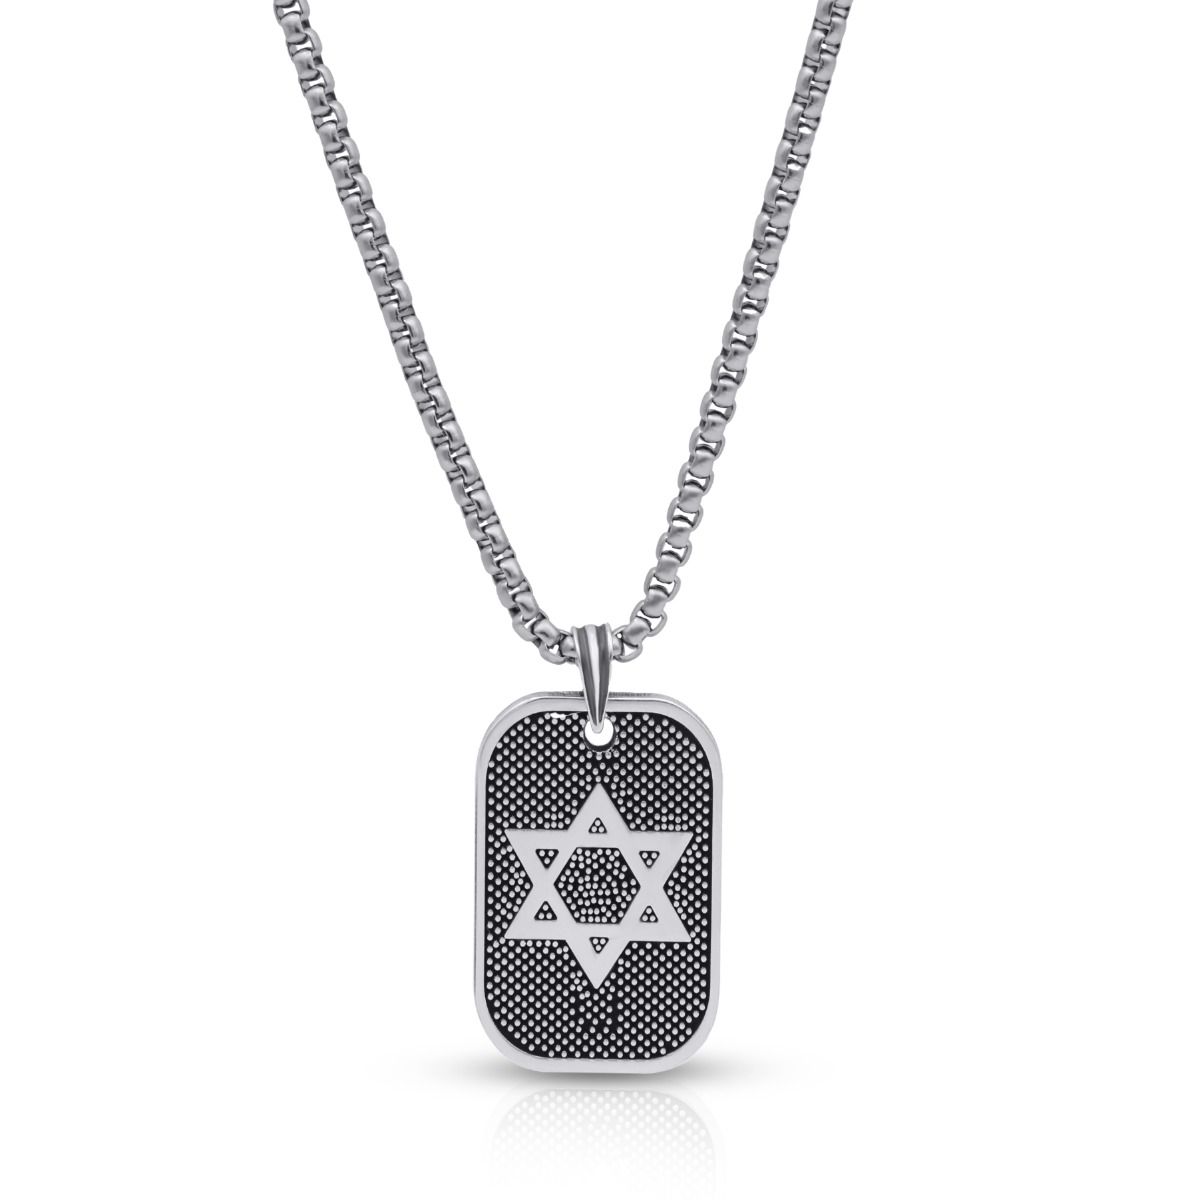 STAR OF DAVID NECKLACE – Ruby Star